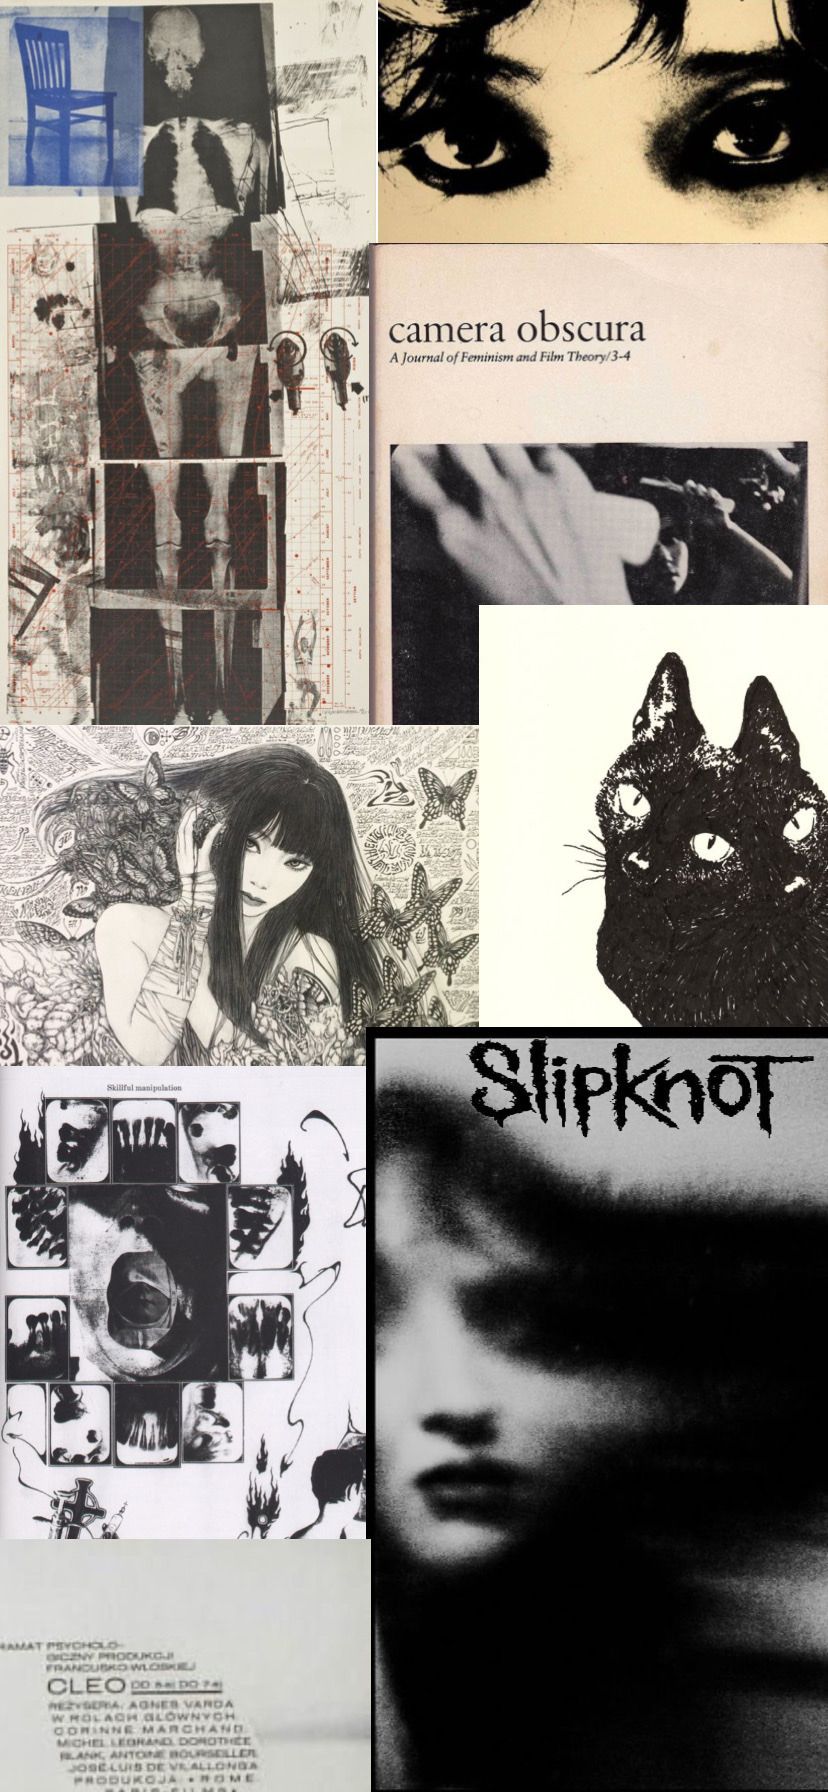 A collage of images including Slipknot album covers, a black and white image of a woman's eyes, and a black and white image of a cat. - Punk